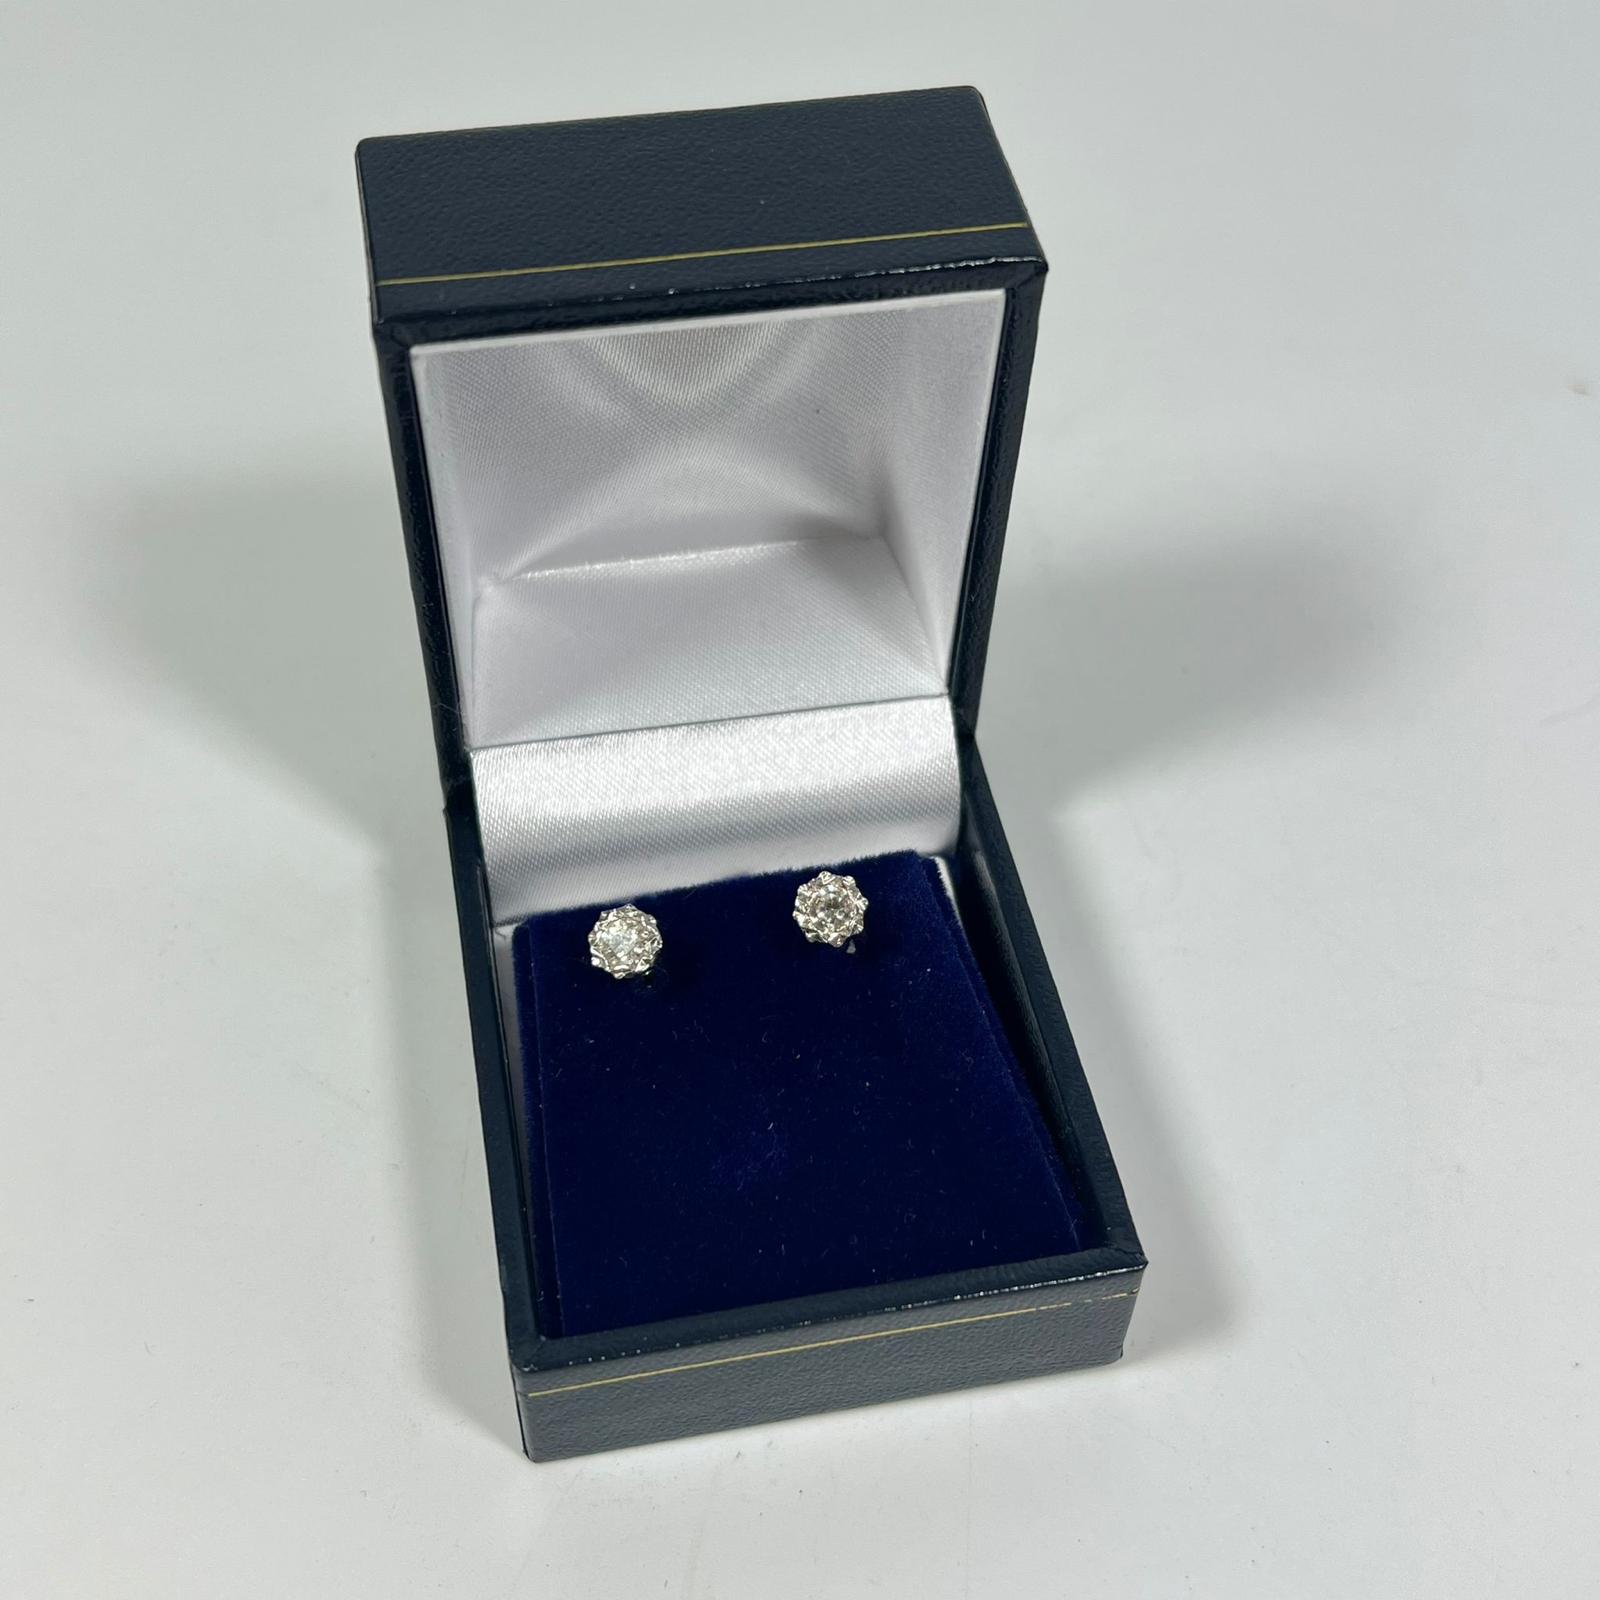 *****AWAY TO VENDOR**** A pair of 18ct yellow gold illusion set diamond stud earrings, approx 1.